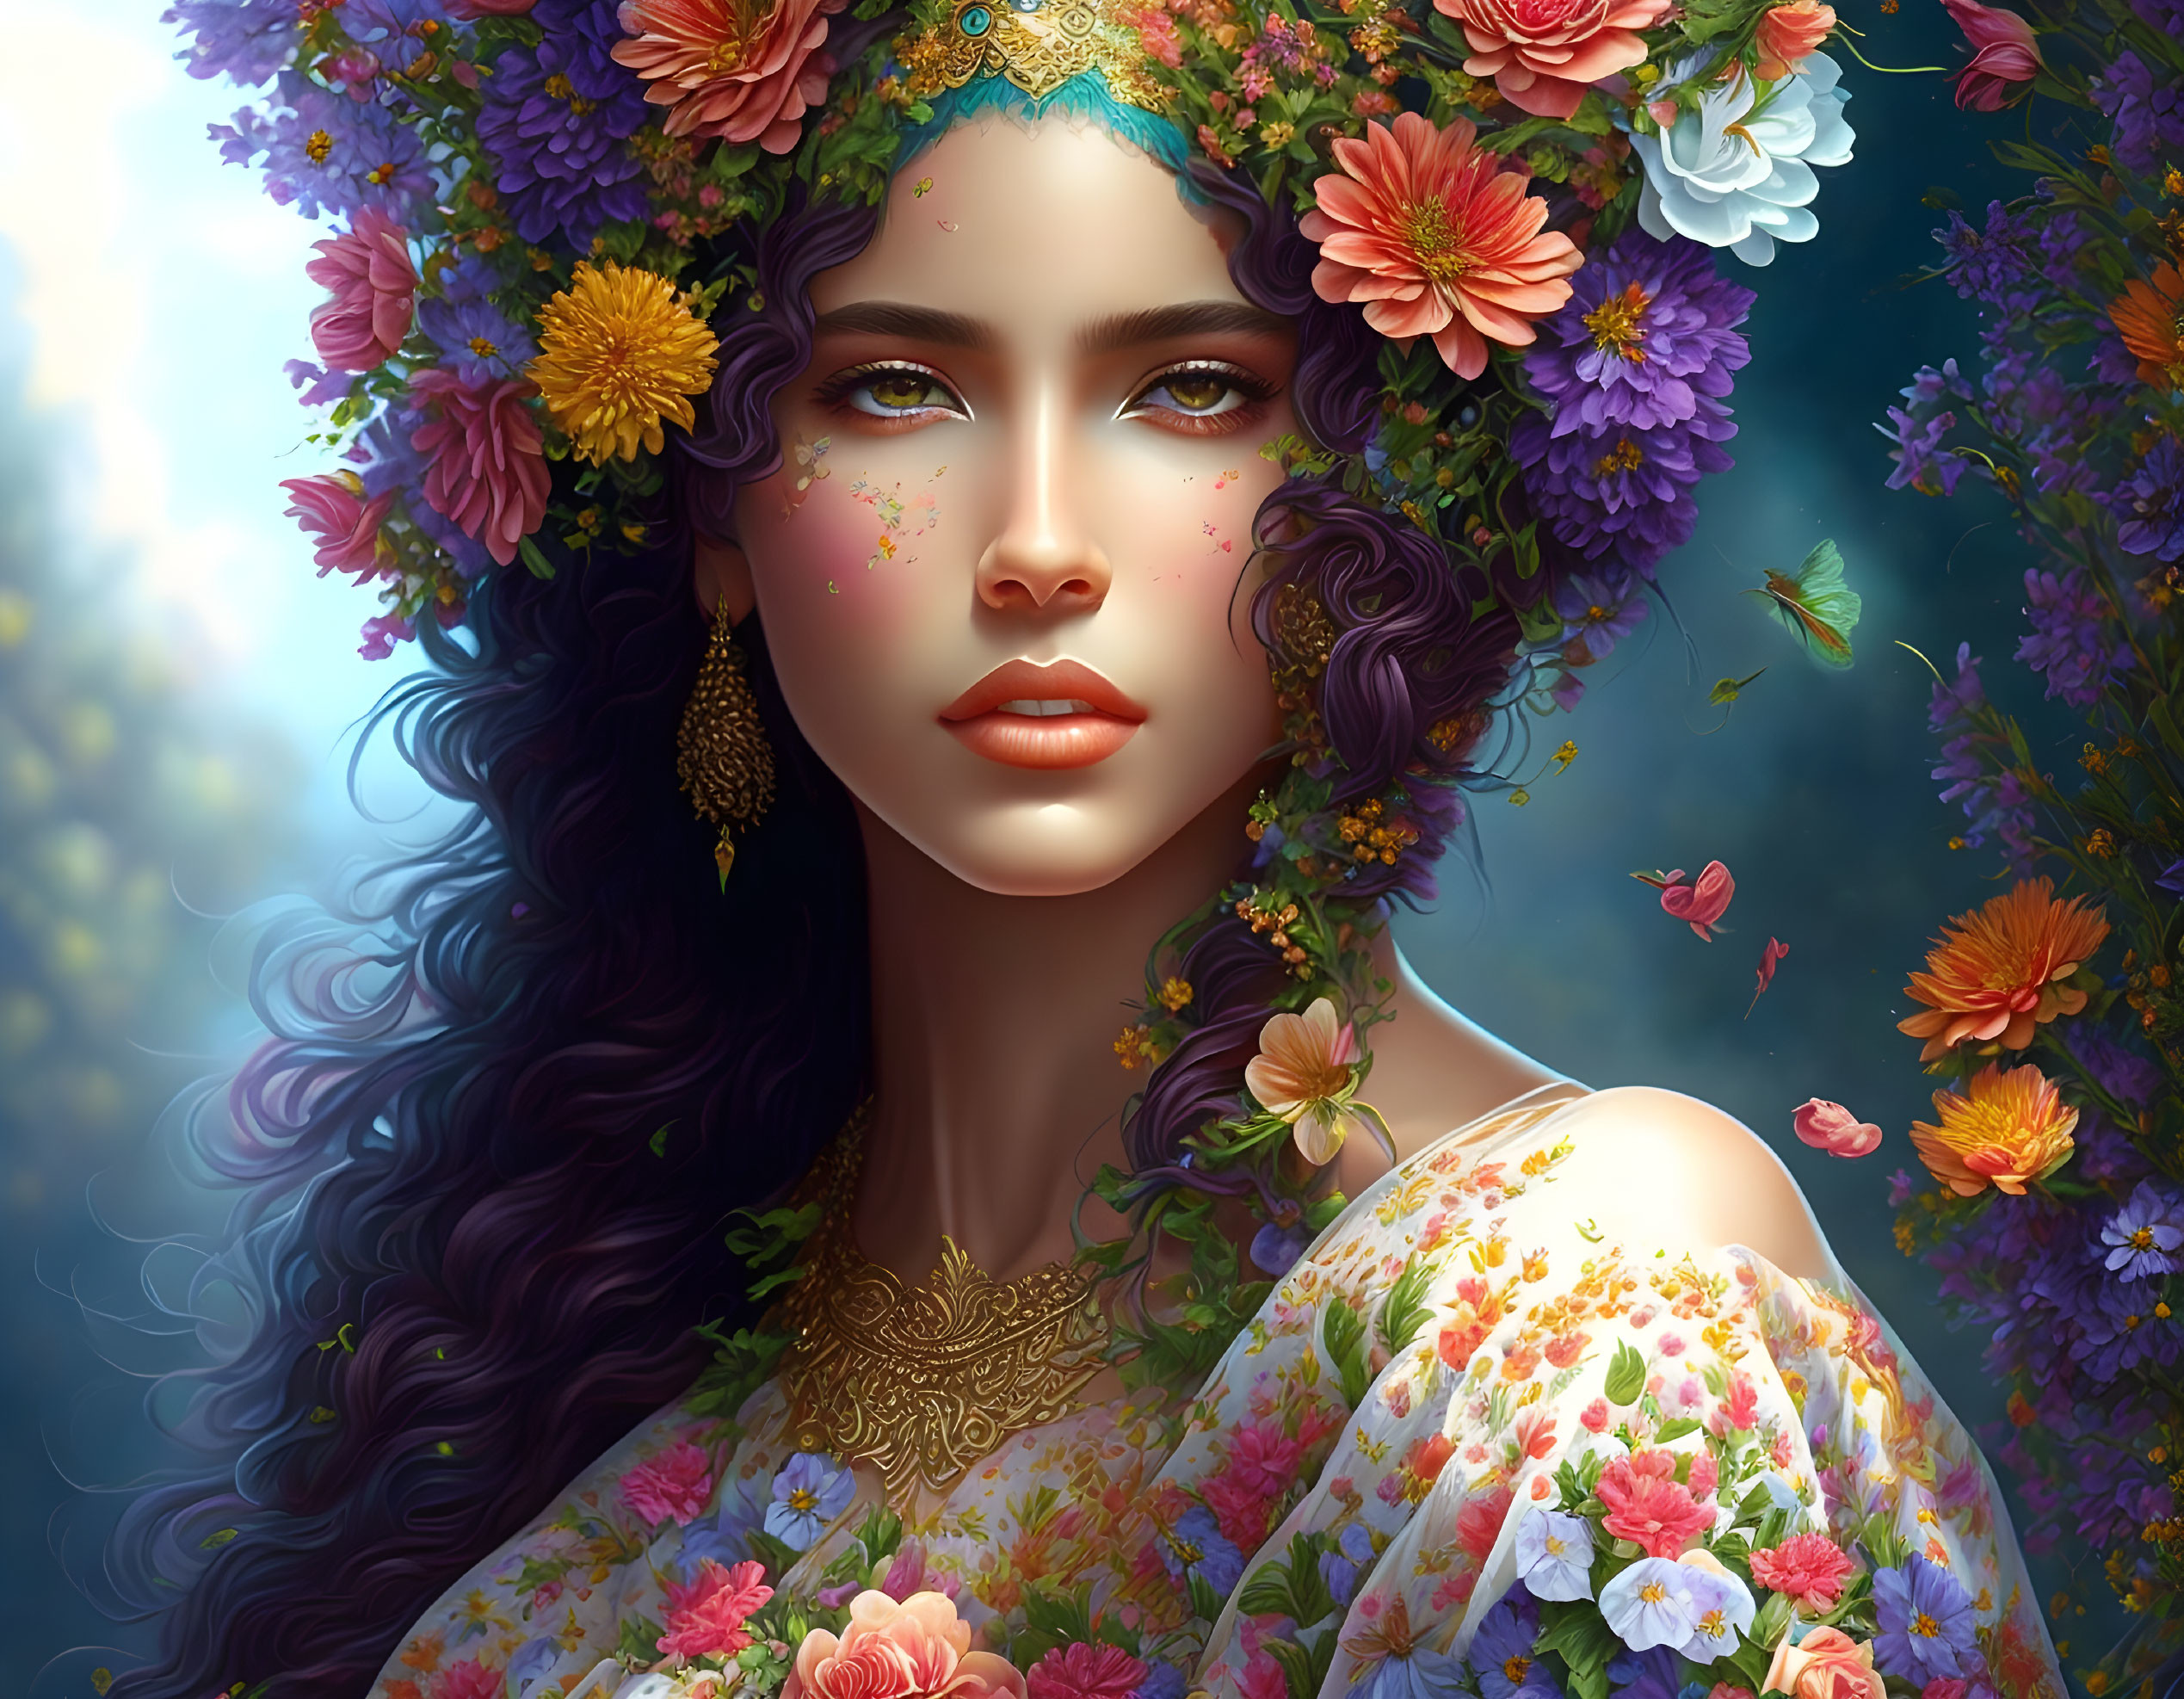 Gorgeous woman with flowers in her hair